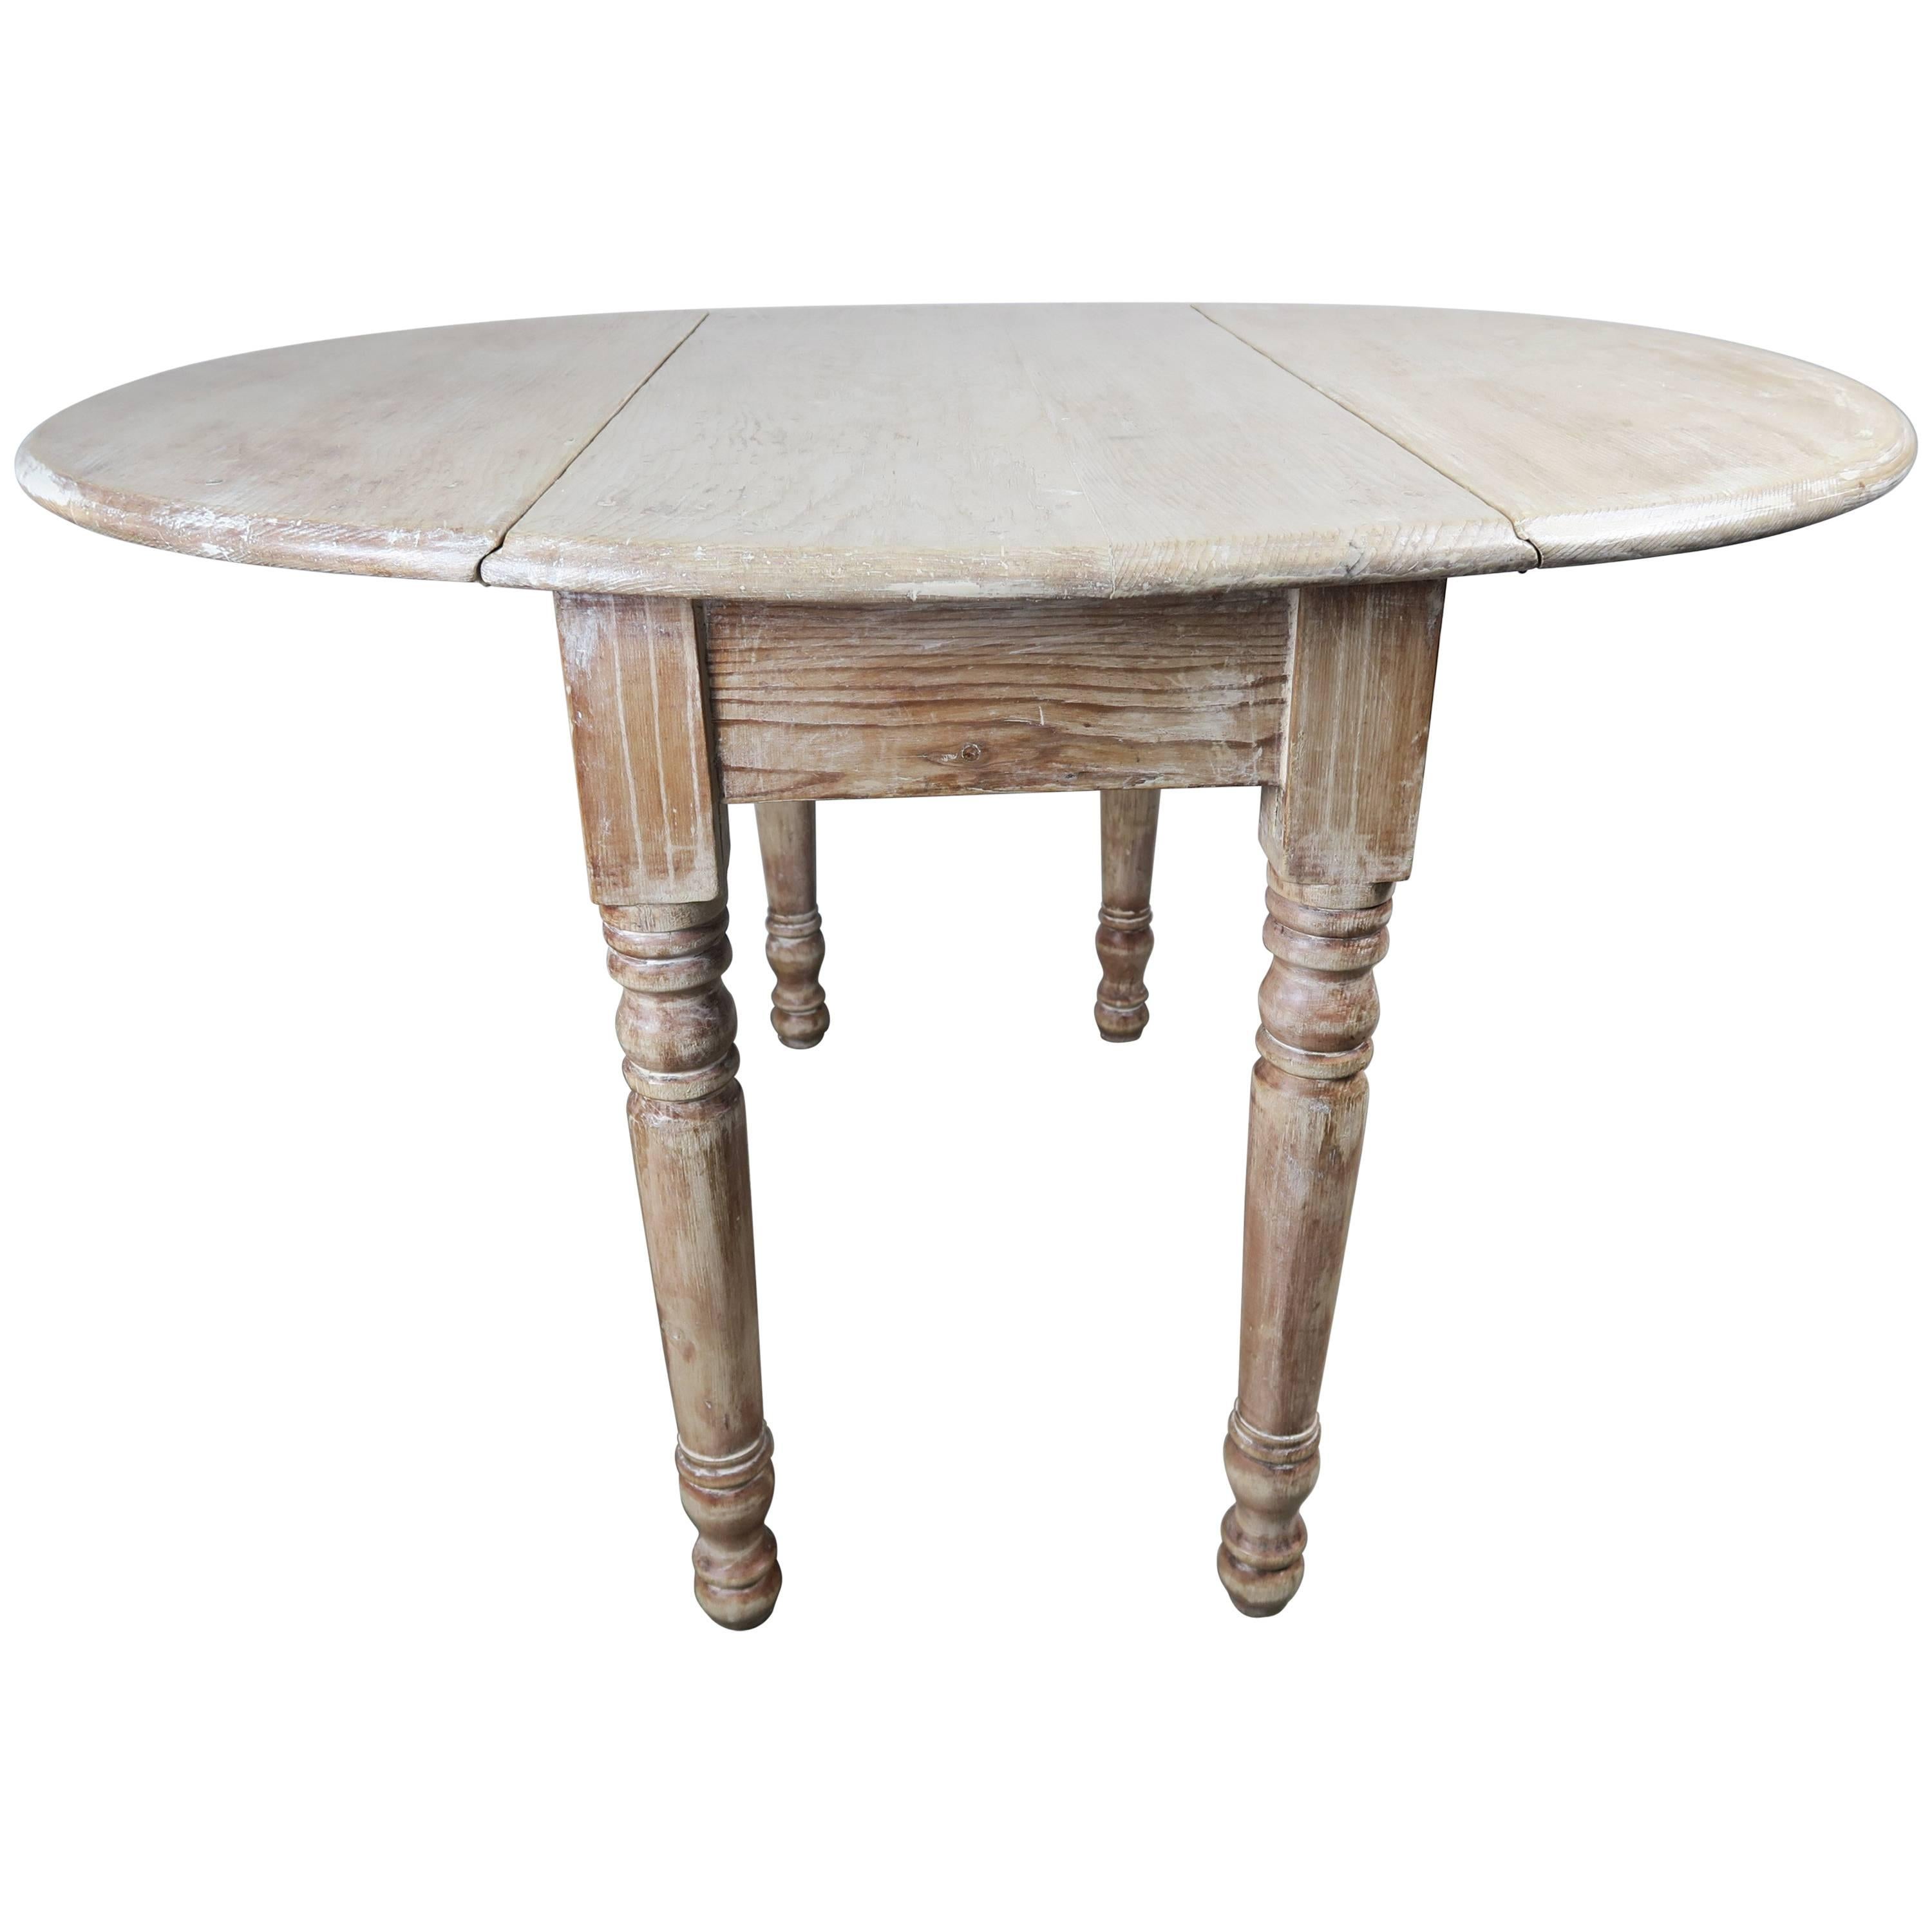 English Drop-Leaf Table with Natural Washed Finish